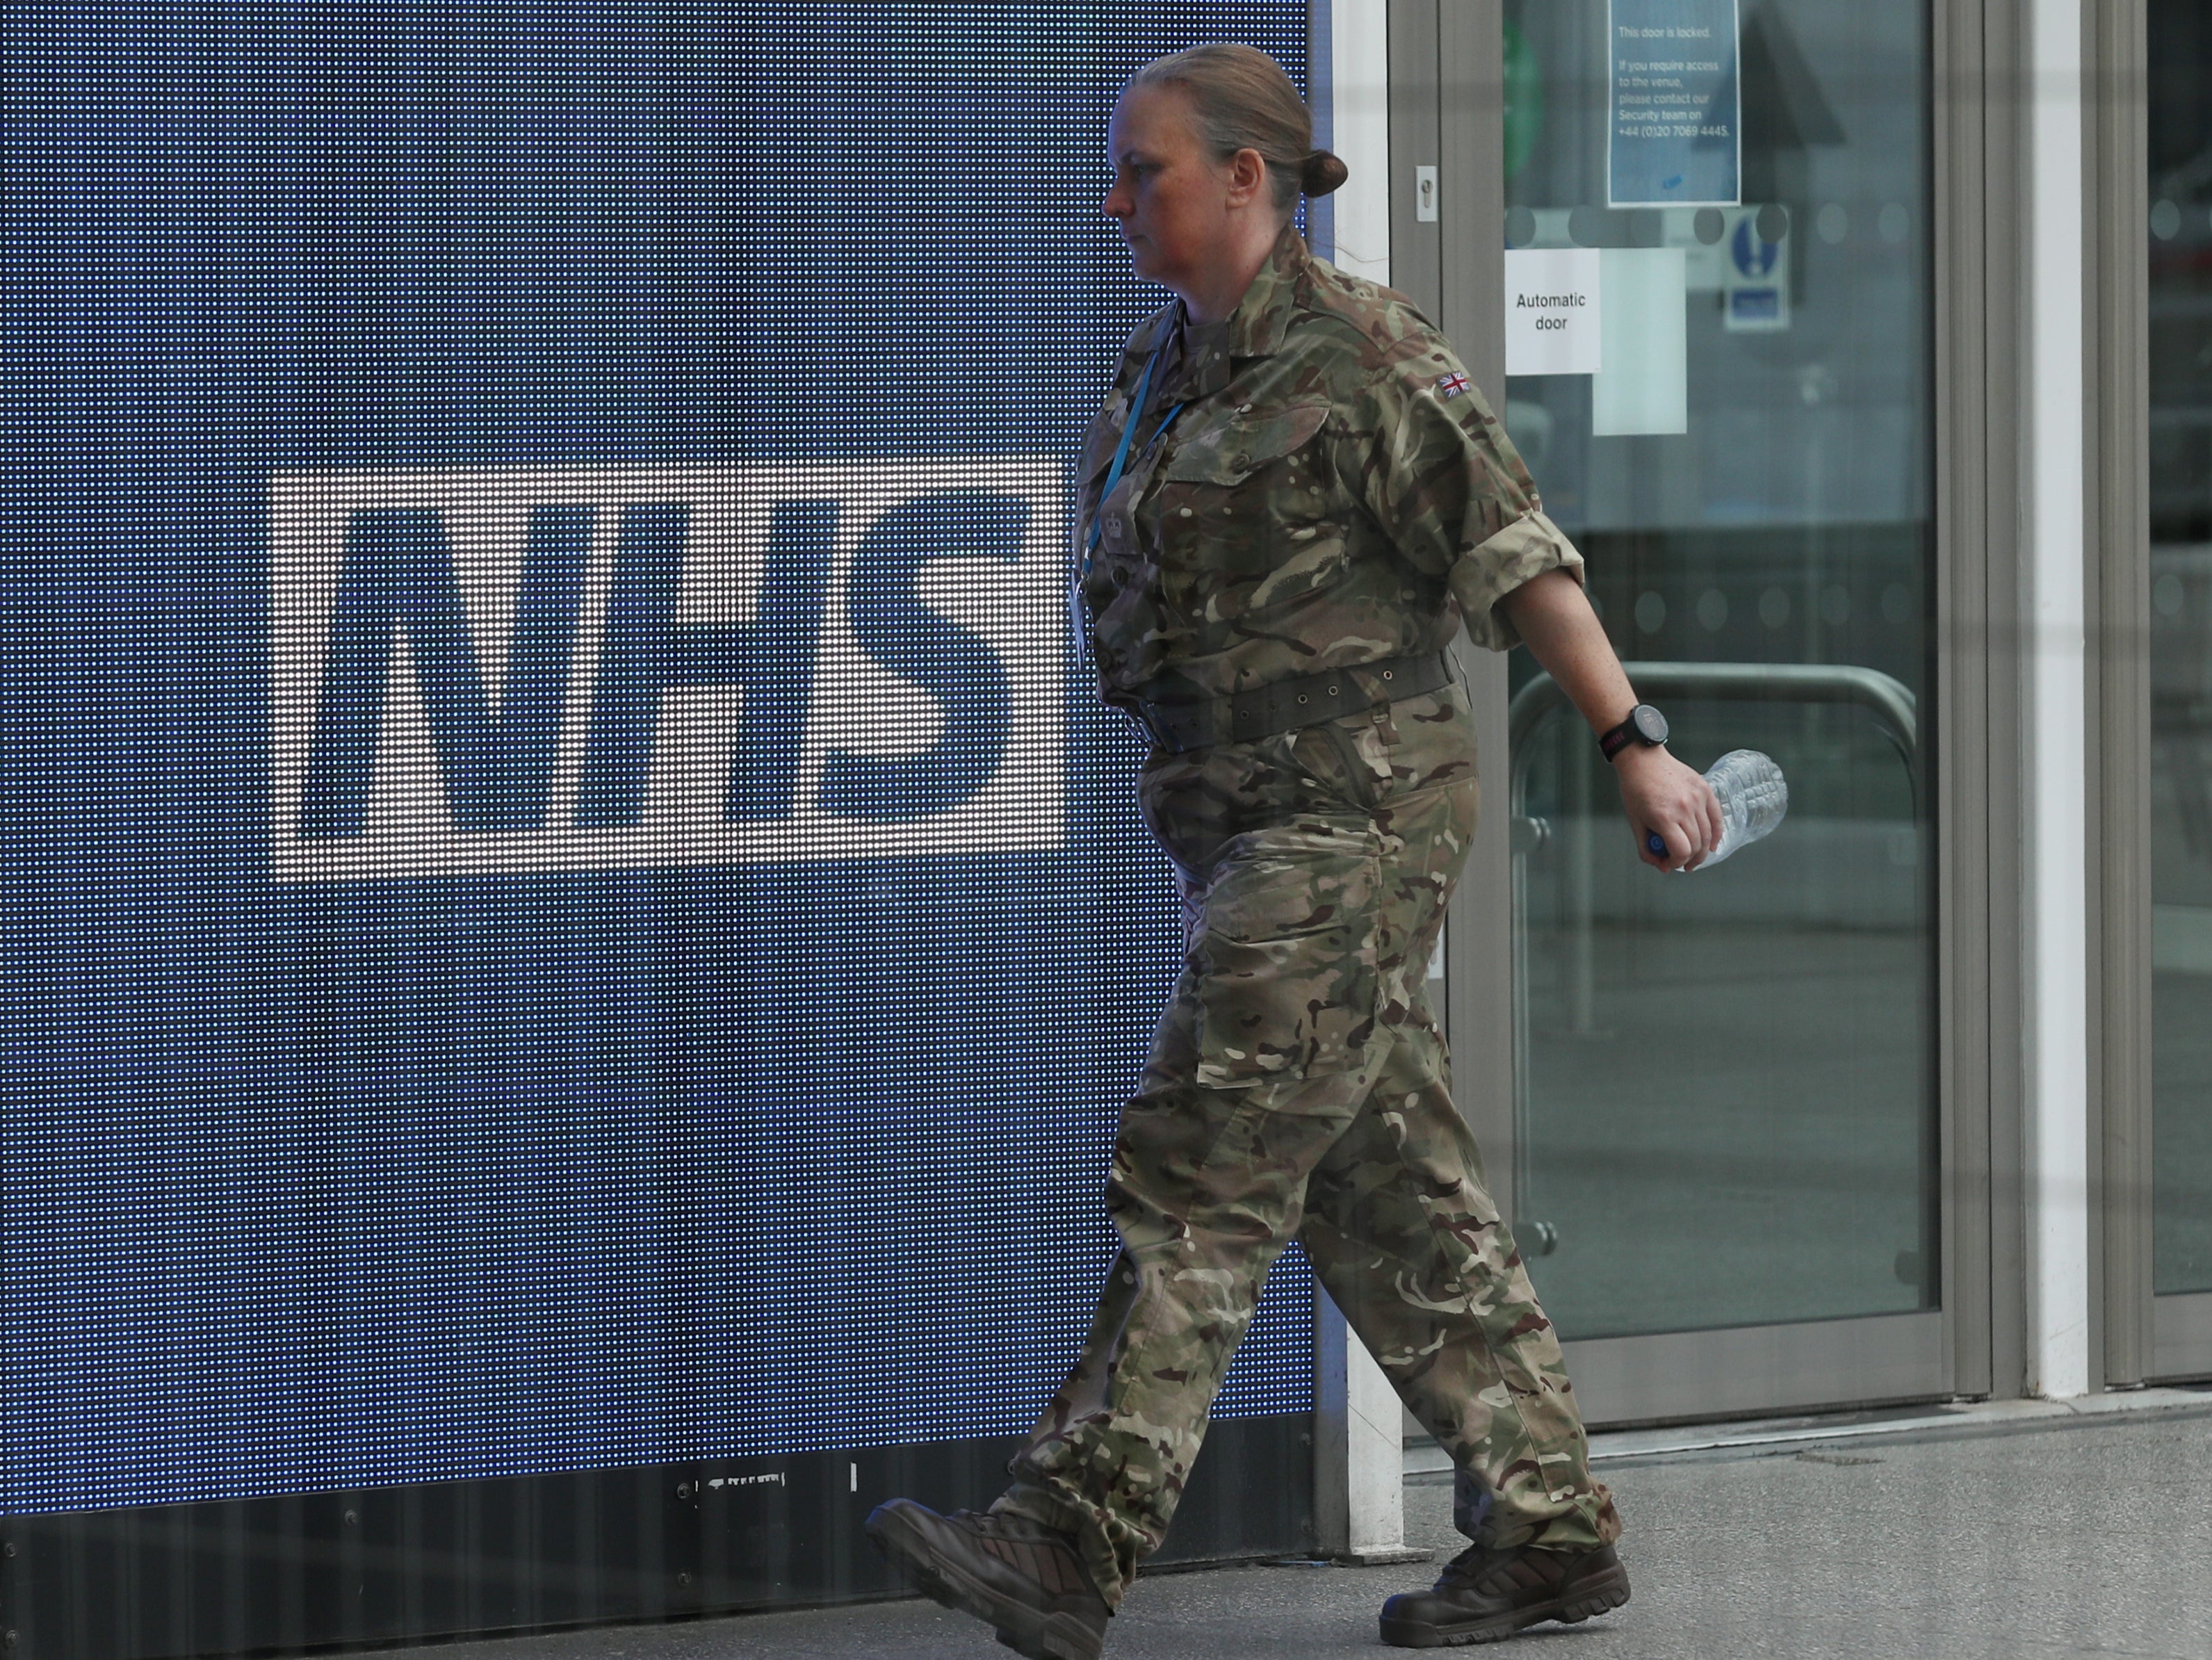 At least 350 soldiers are being brought in to staff hospital wards